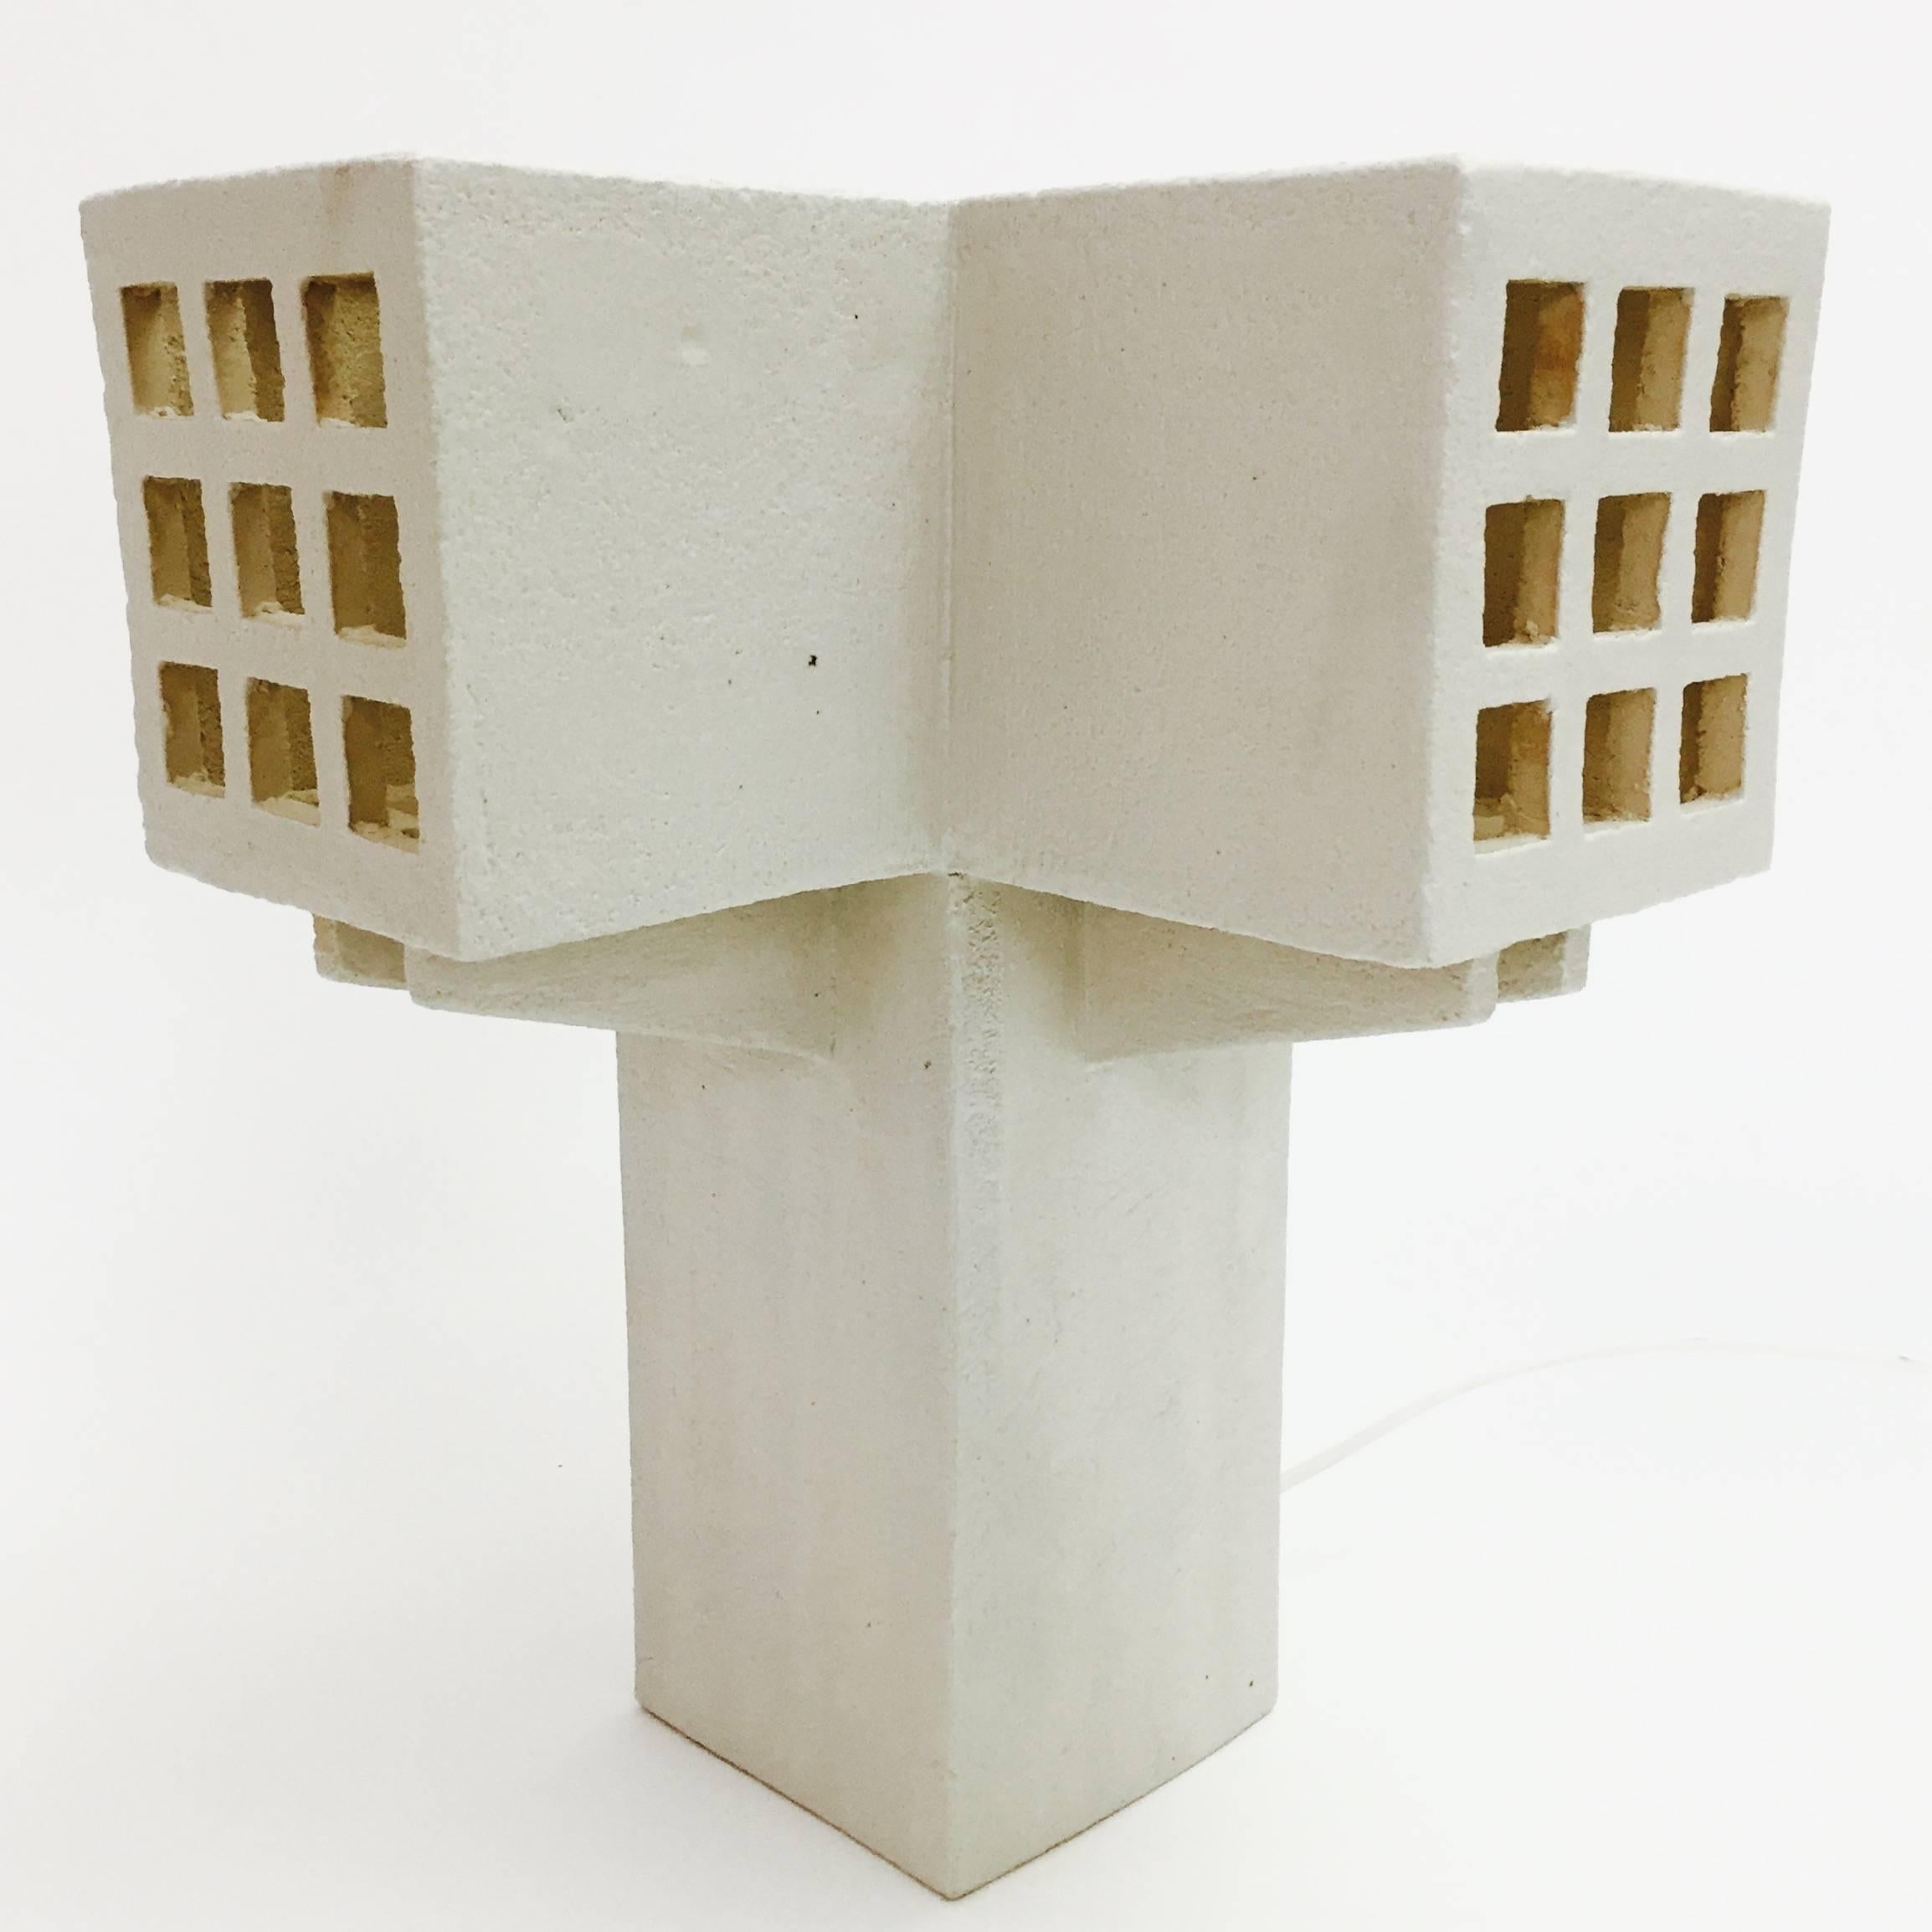 Geometric sculpture, forming a cross table lamp, textured clay glazed in shades of pale cream, decorated with open windows perforations.
One of a kind contemporary handmade creation, designed by the French ceramicist.

Note to International